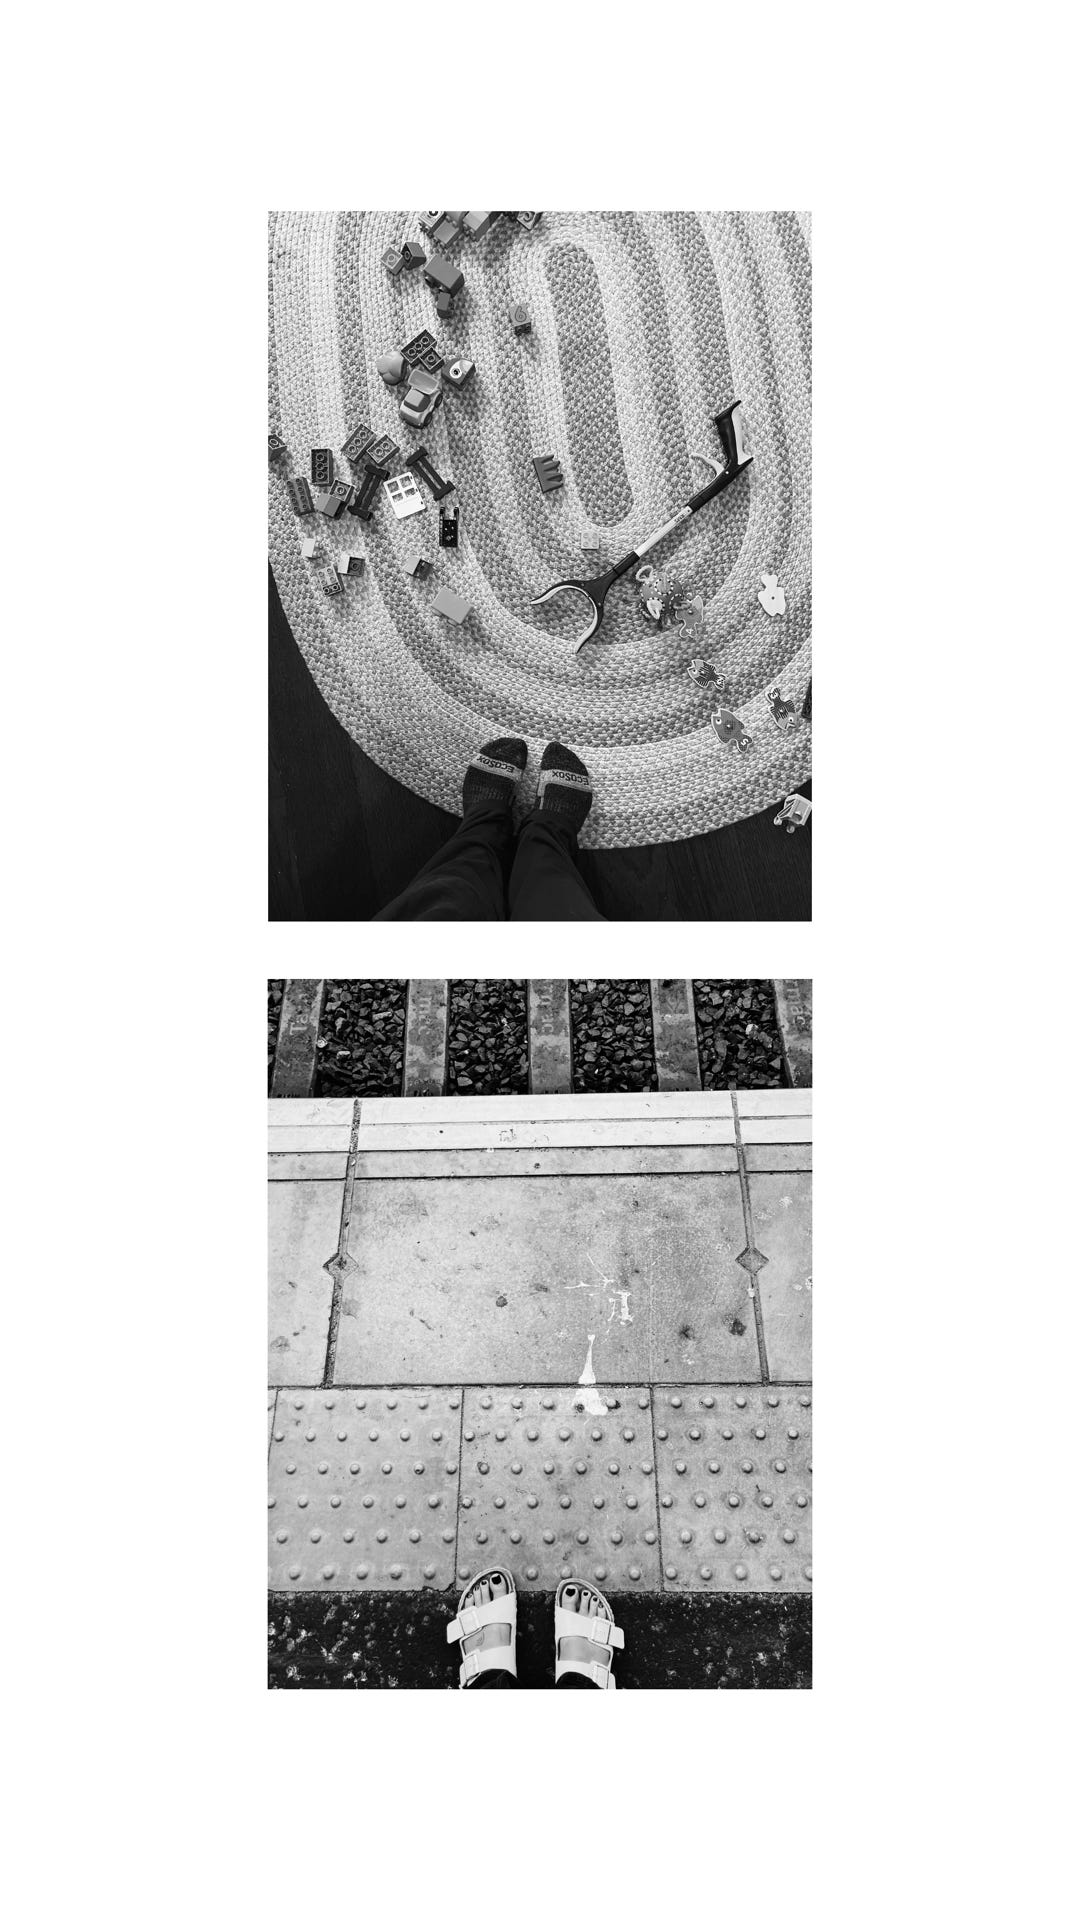 Two black and white photographs. The first is a pair of feet in socks standing on a braided rug with blocks and a grabbing arm. The second is a pair of feet in sandals at a UK train station.